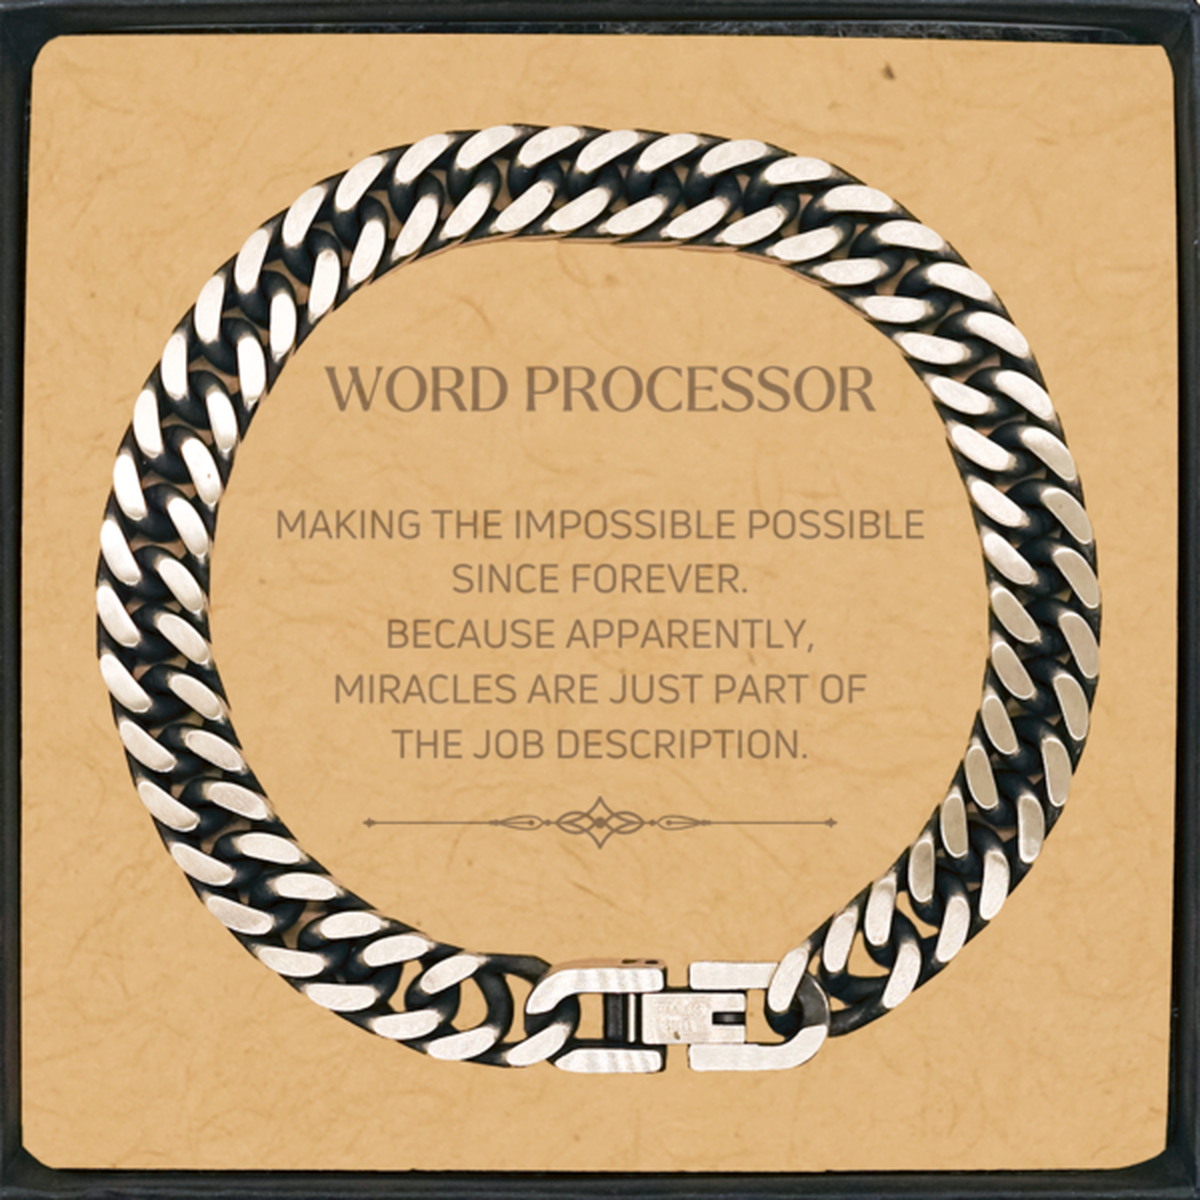 Funny Word Processor Gifts, Miracles are just part of the job description, Inspirational Birthday Cuban Link Chain Bracelet For Word Processor, Men, Women, Coworkers, Friends, Boss